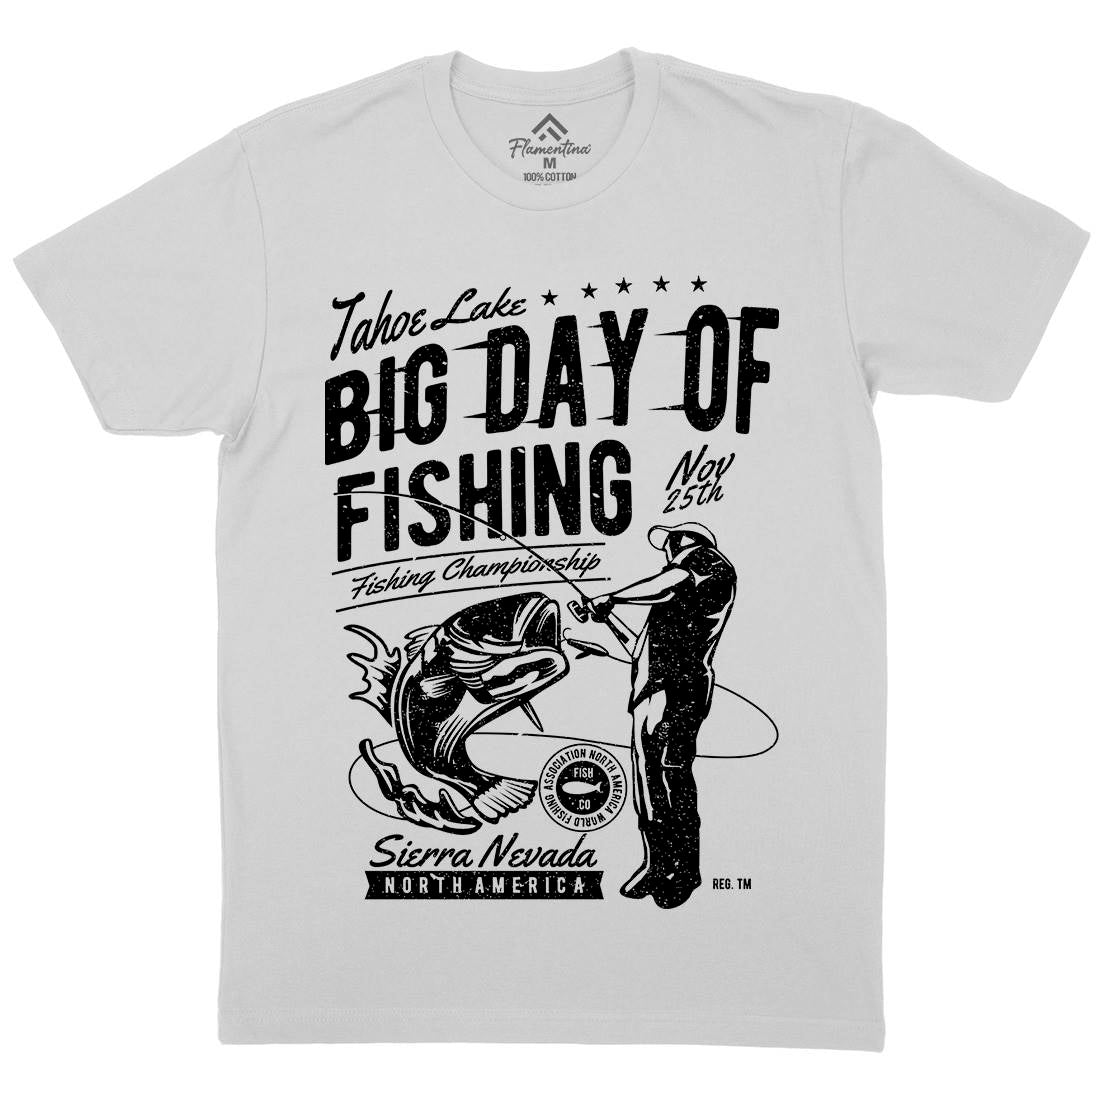 Big Day Of Mens Crew Neck T-Shirt Fishing A618